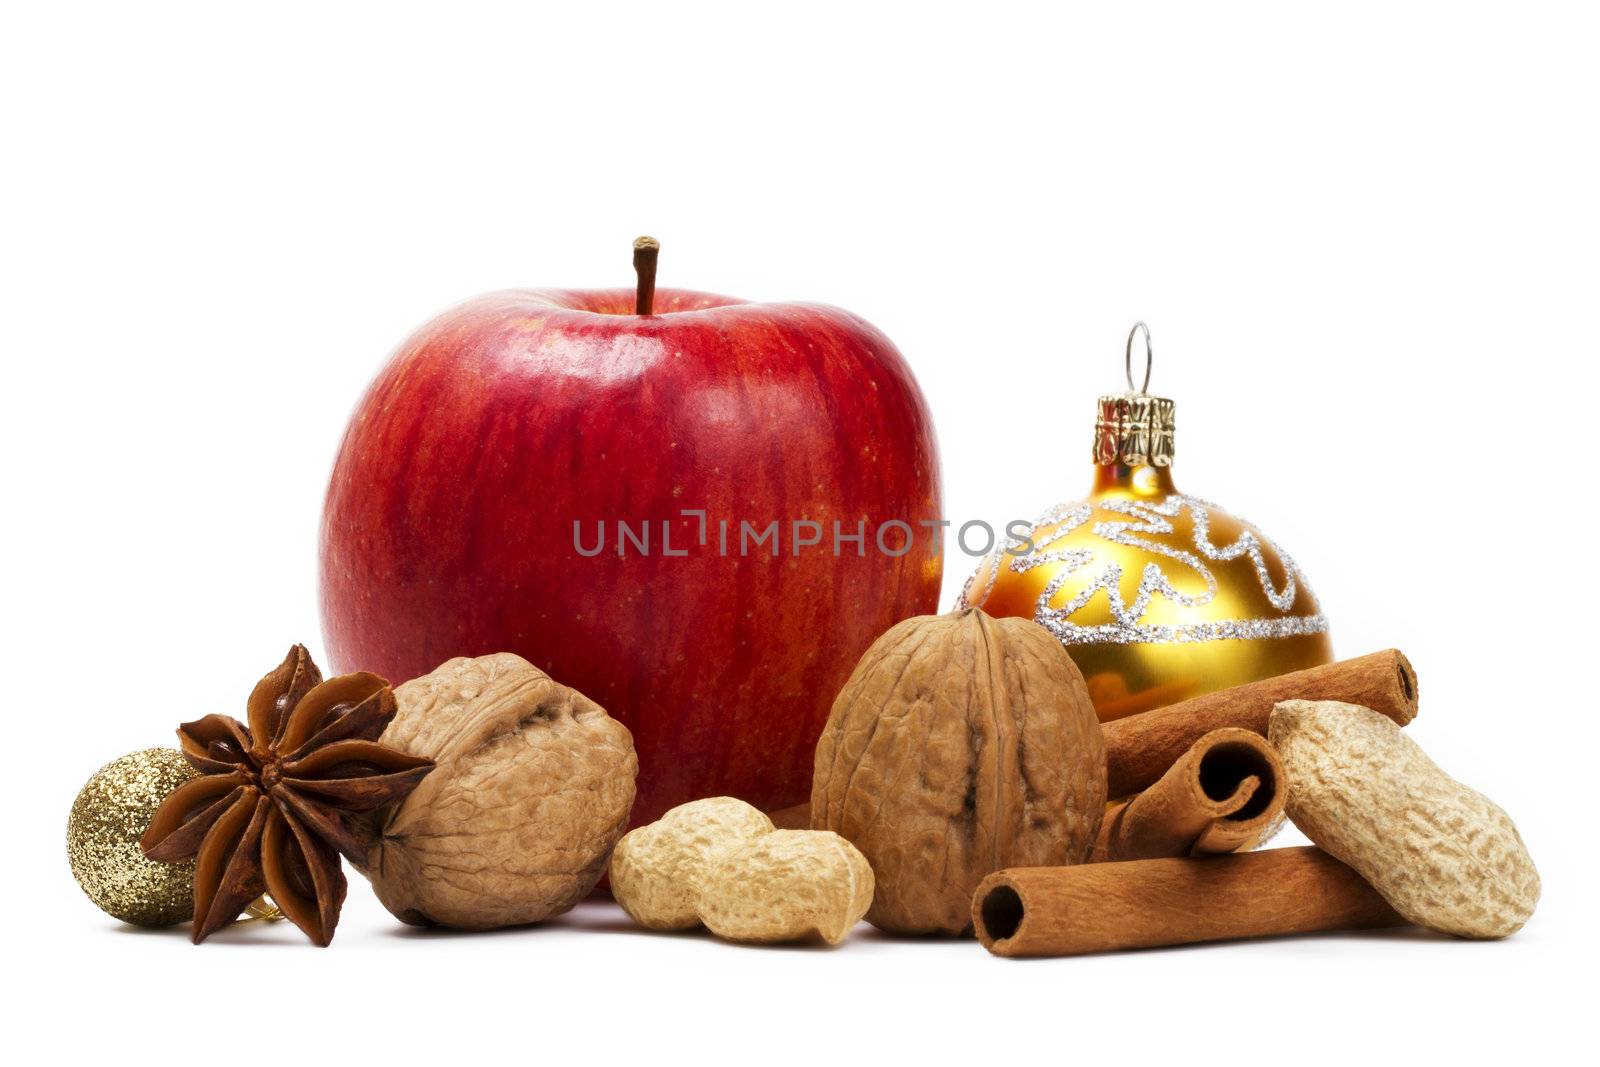 a red apple, star anise, walnuts and peanuts, a christmas ball and cinnamon sticks on white background